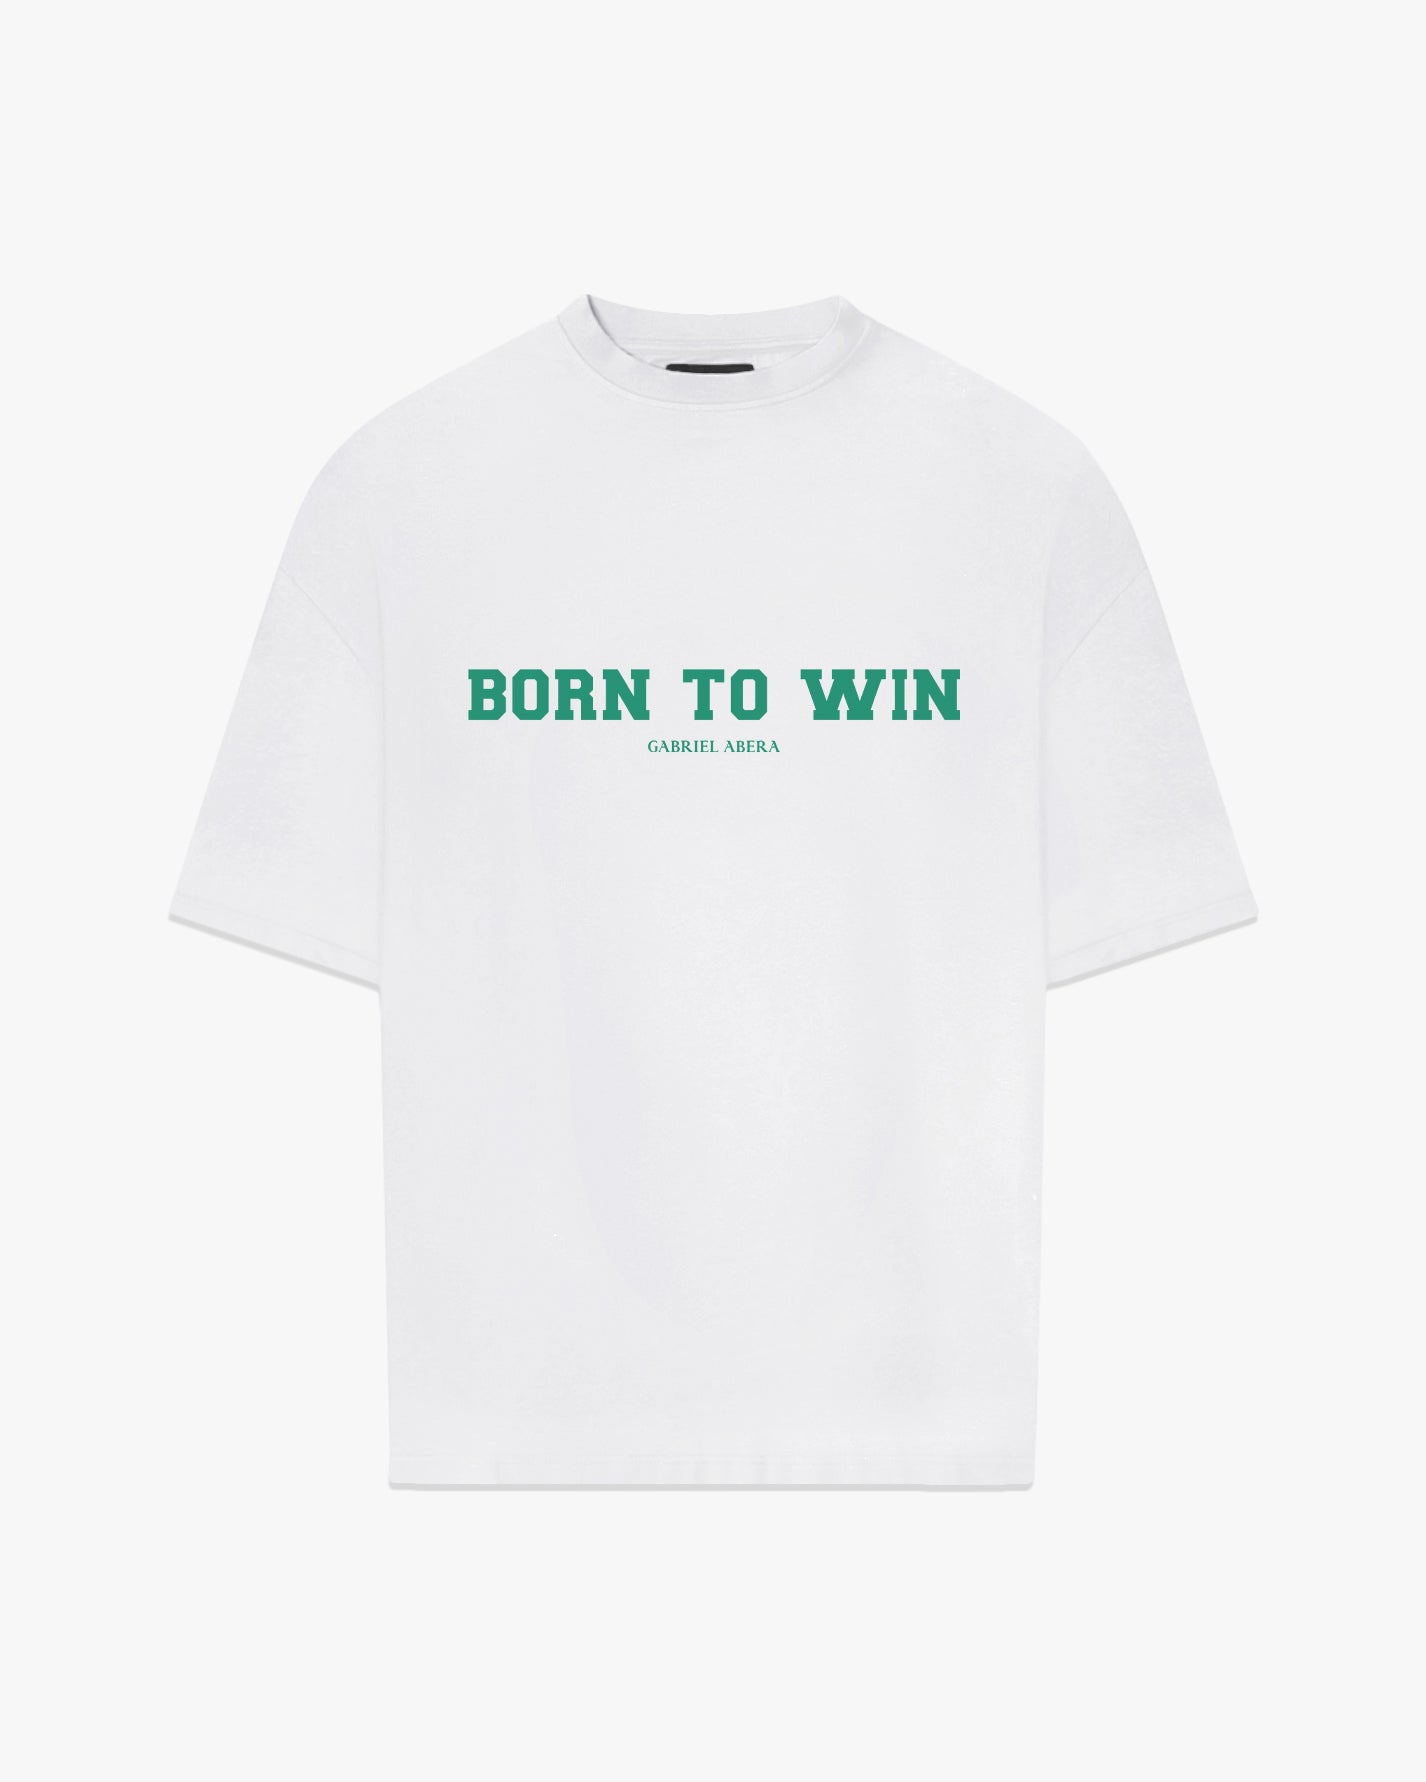 White oversize tshirt with born to win design on the front